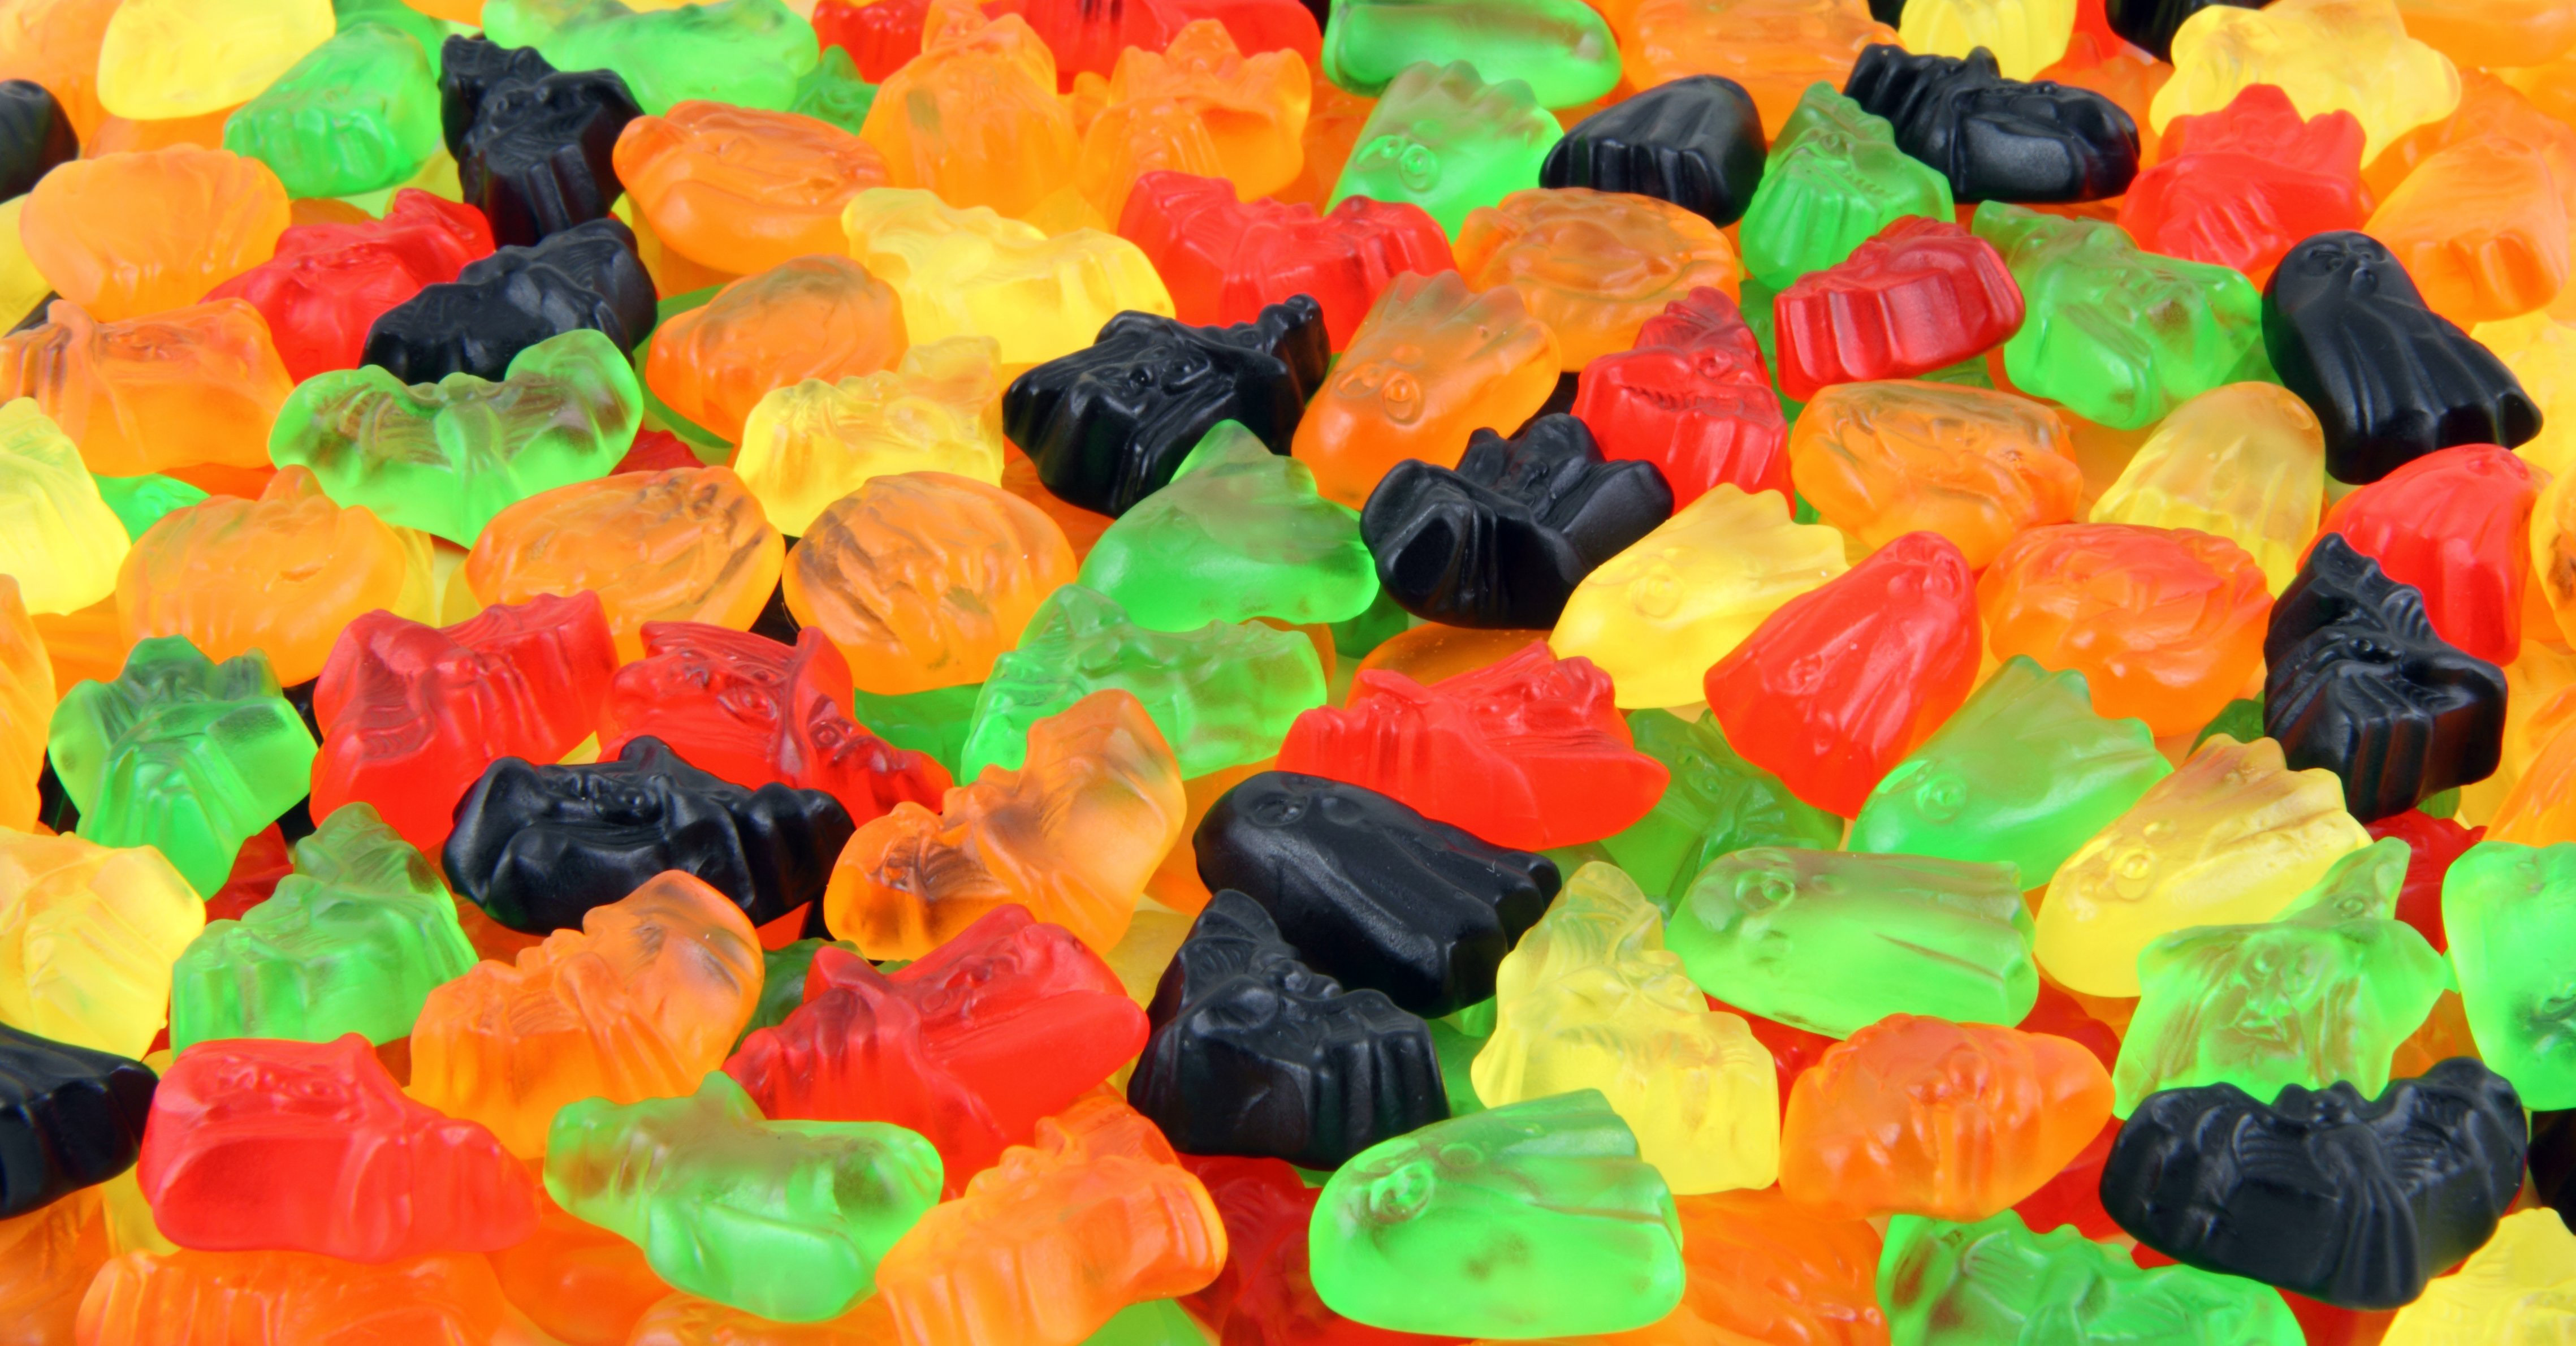 Colored Gummy Candy image - Free stock photo - Public Domain photo - CC0 Images